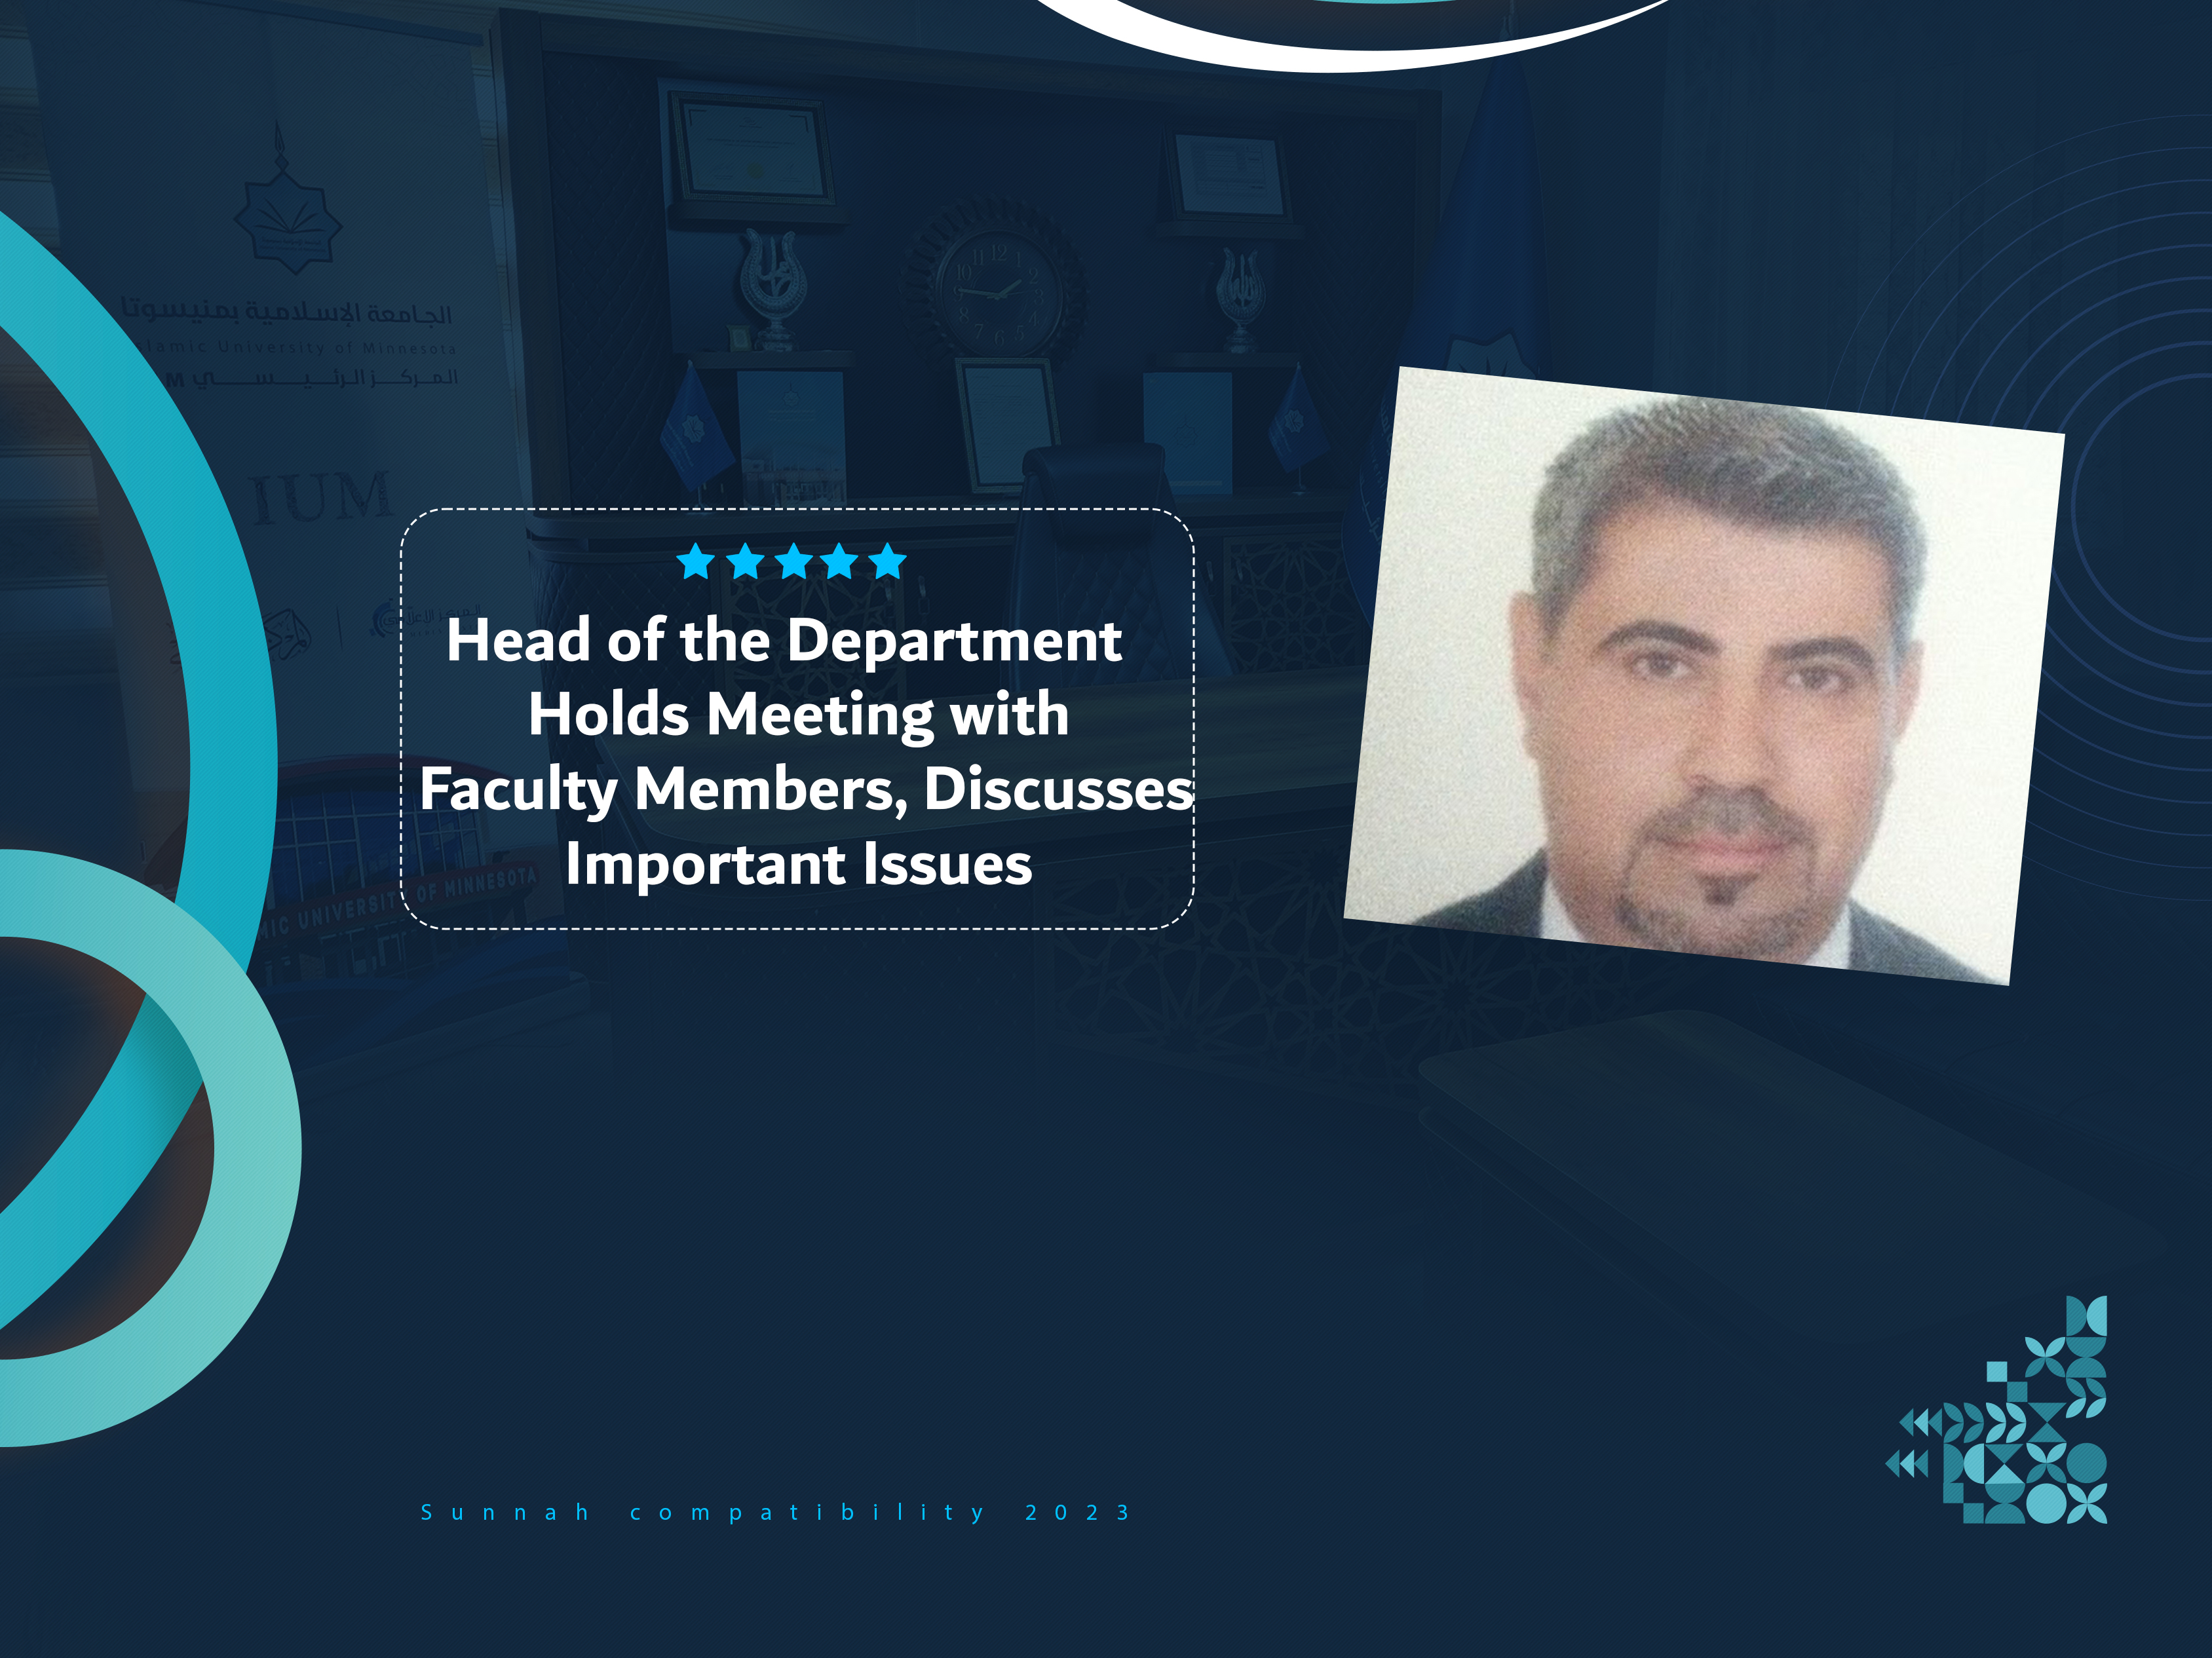 Head of the Department Holds Meeting with Faculty Members, Discusses Important Issues